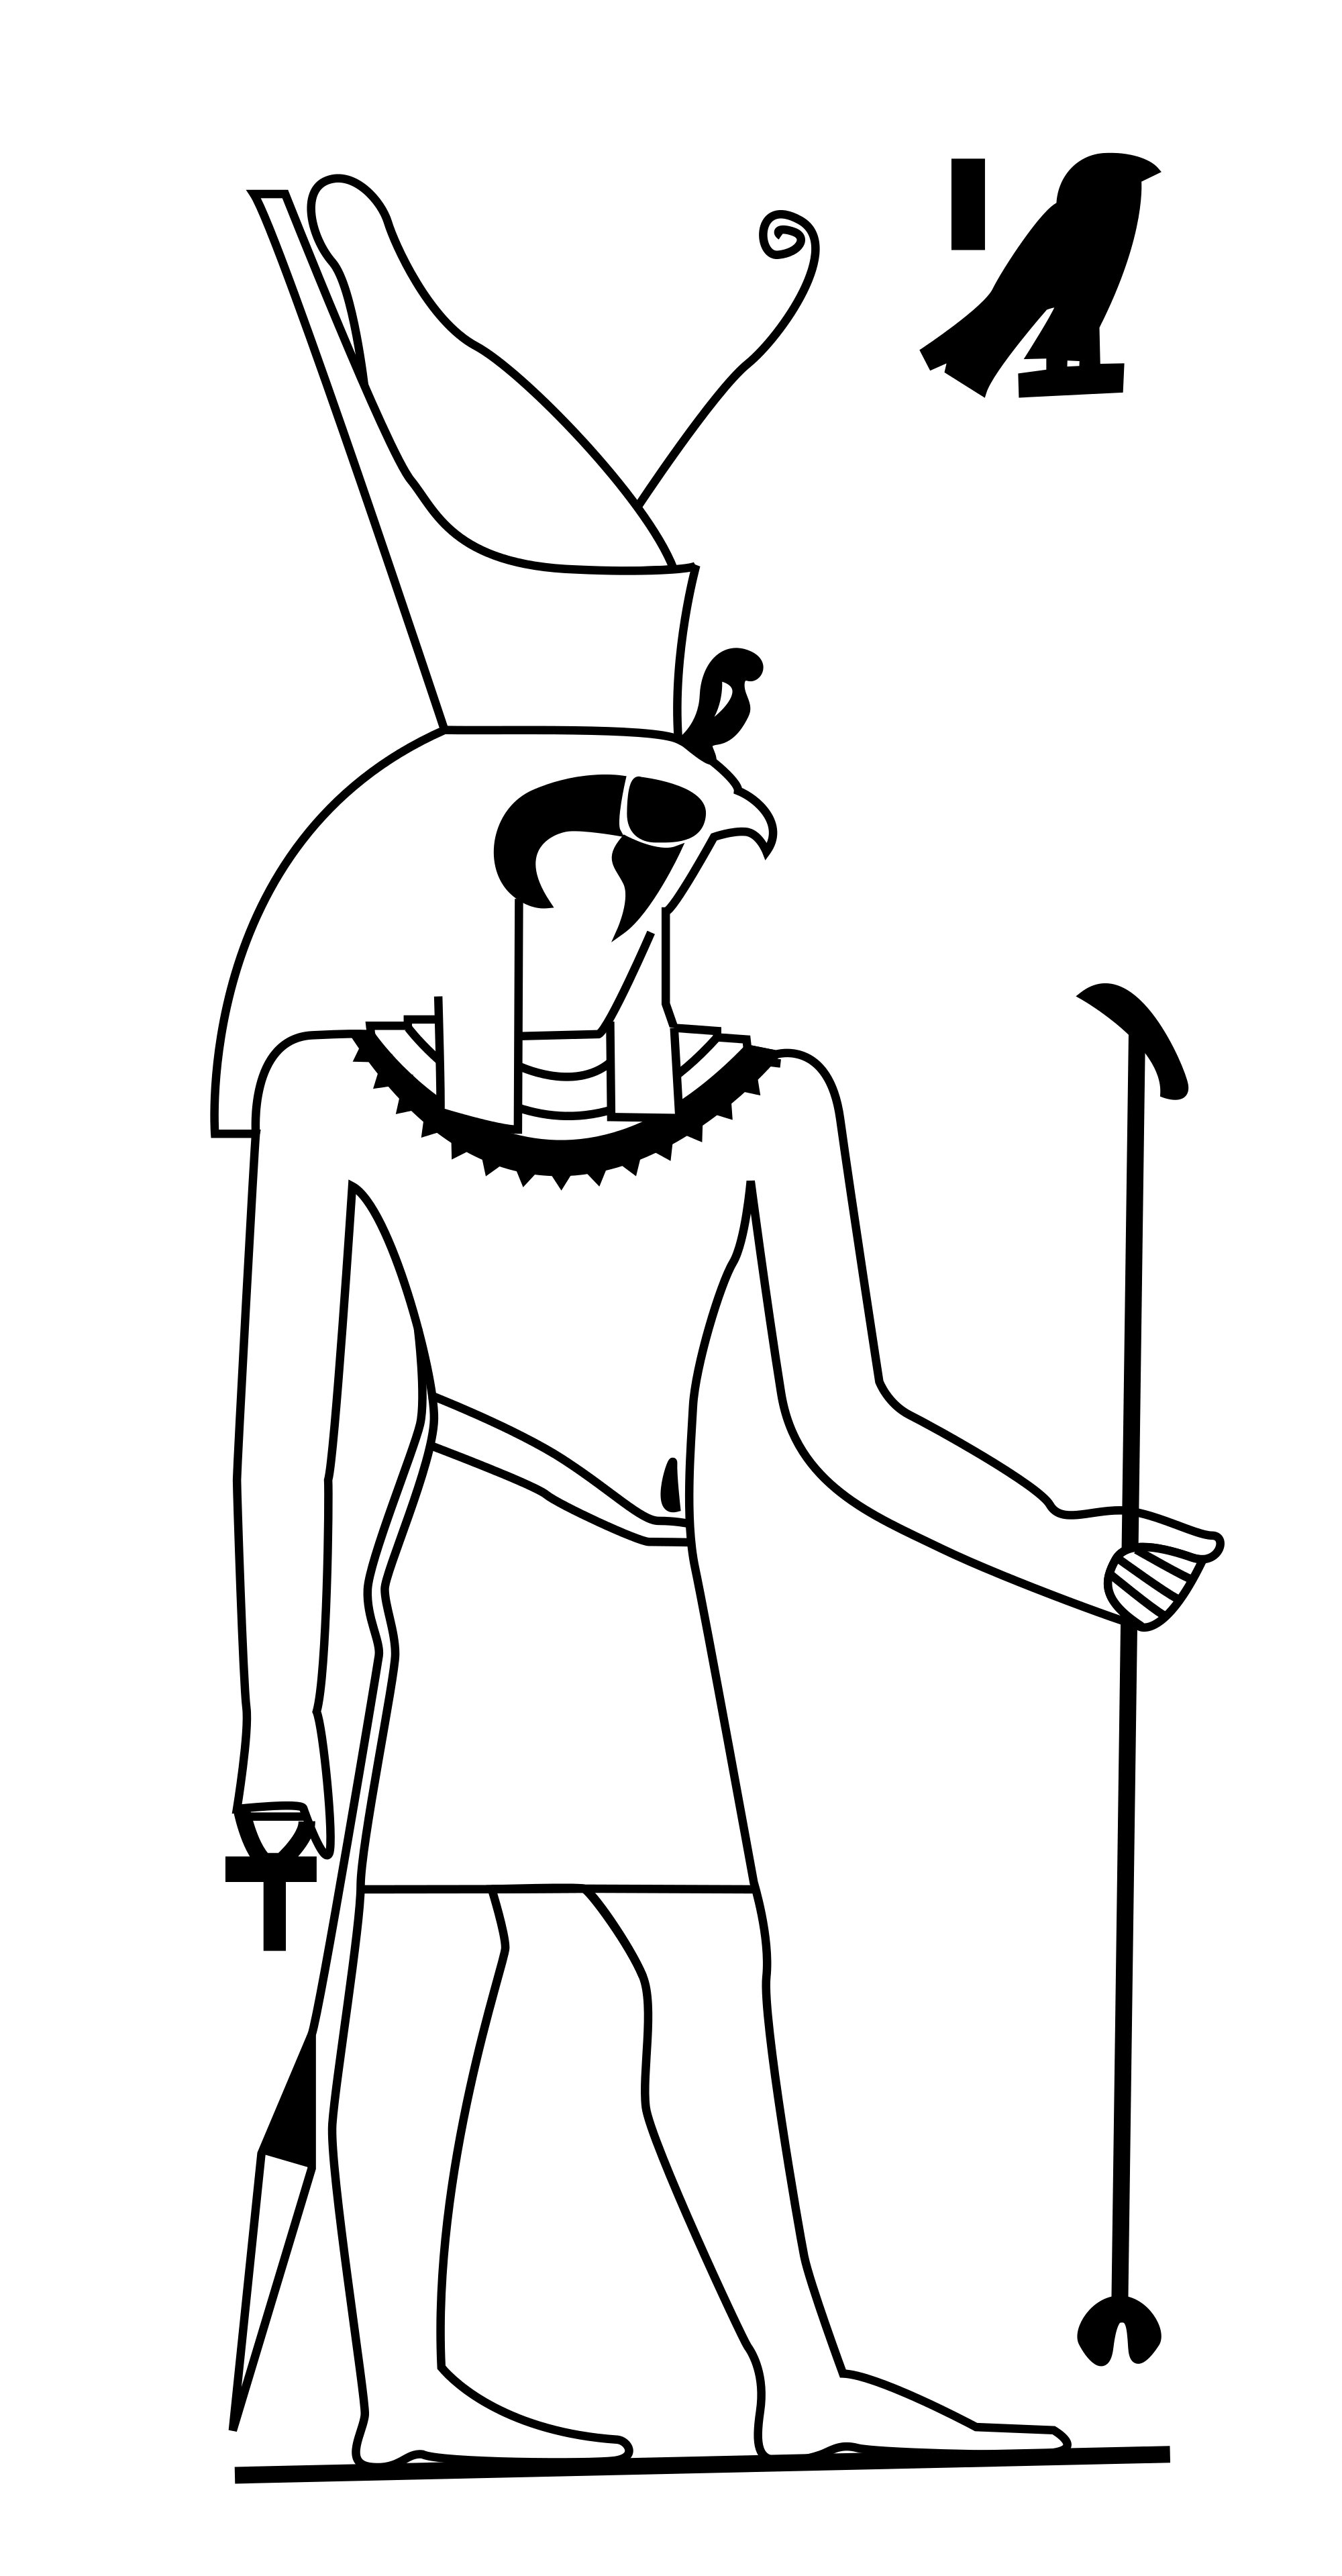 Pharaoh Silhouette Background PNG Image